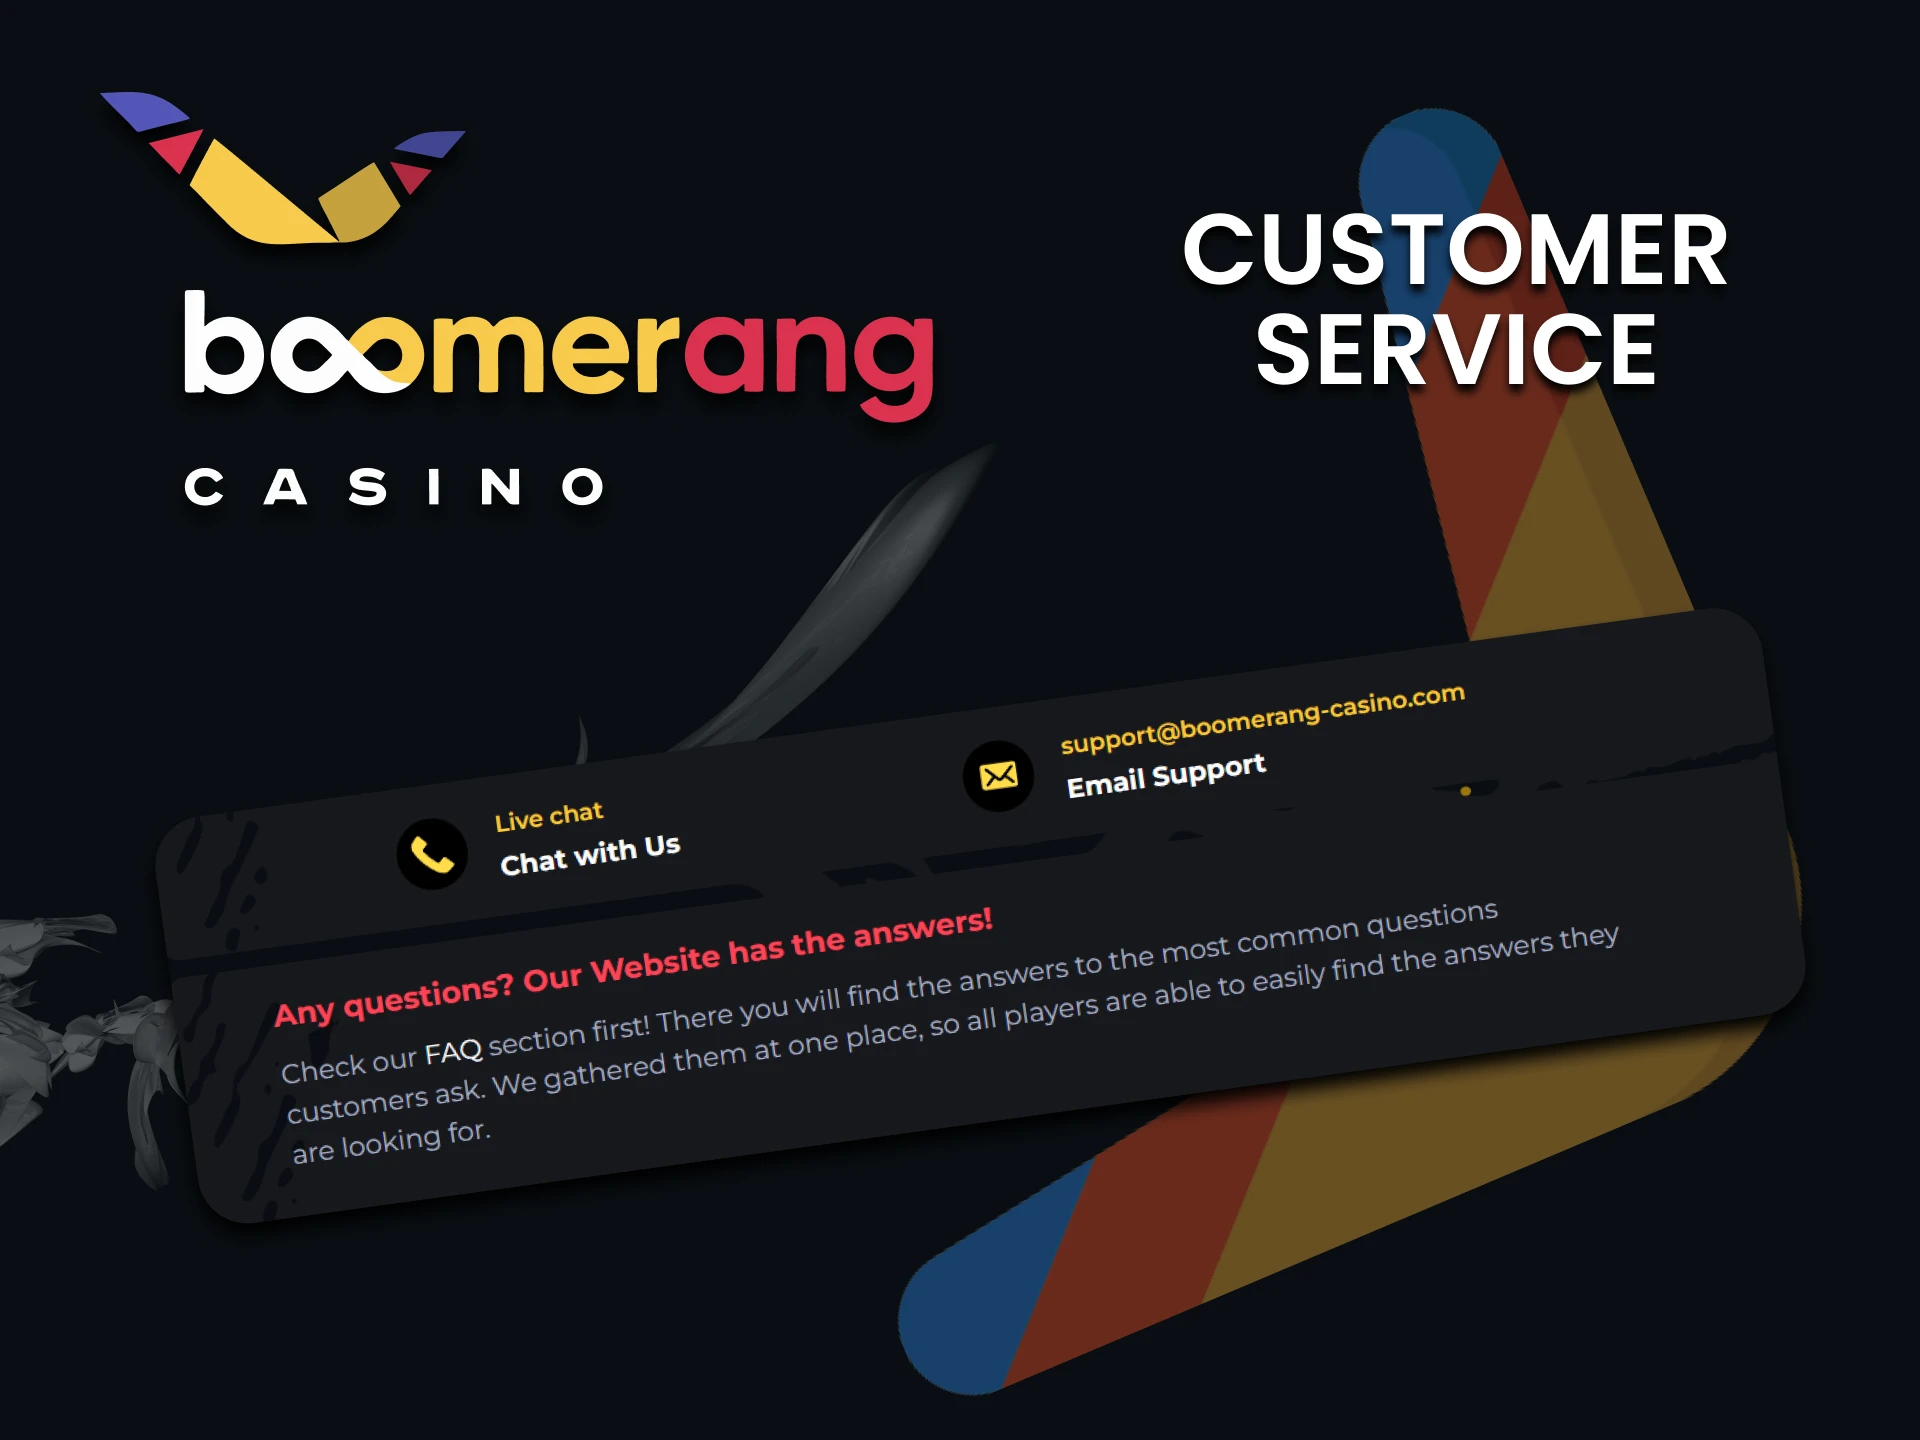 Find out about the support service for the Boomerang Casino website.